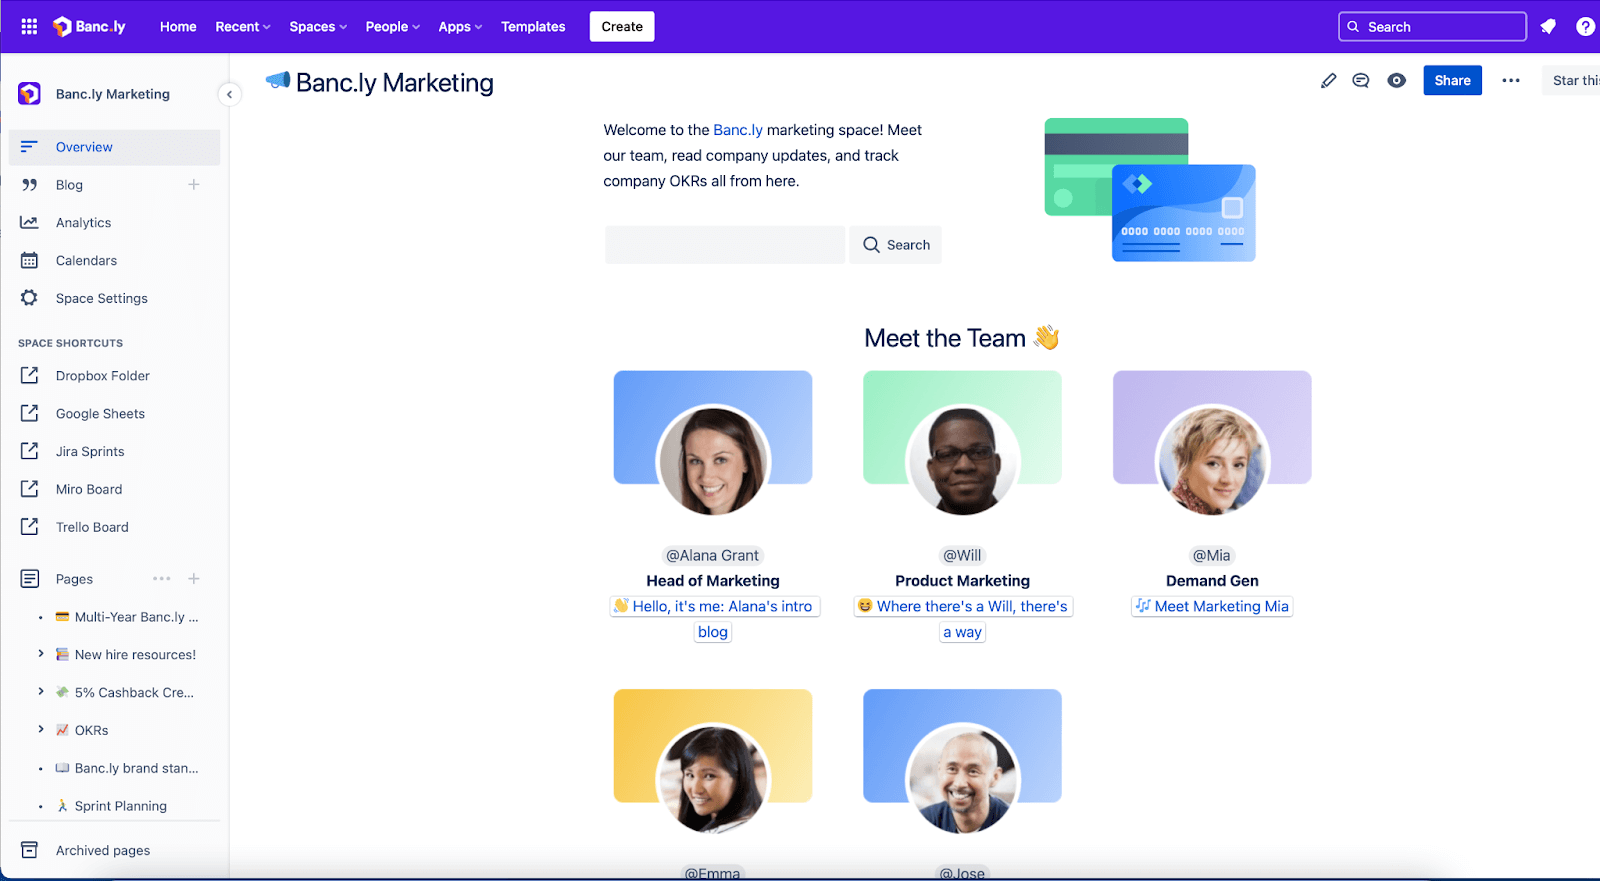 Bancly overview page